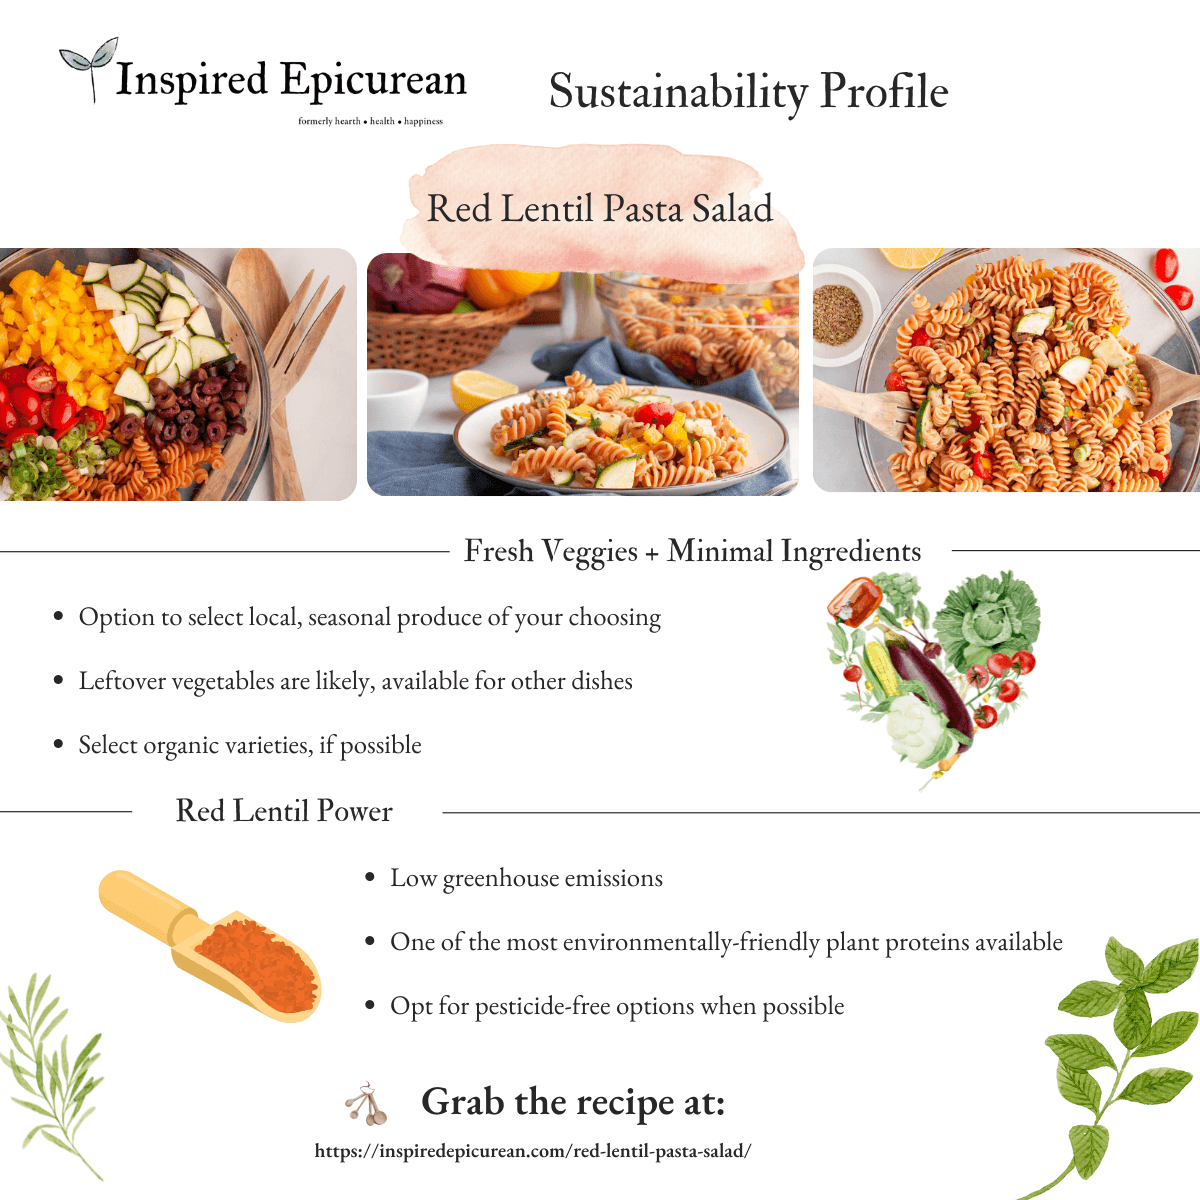 sustainability overview of red lentil pasta salad with images